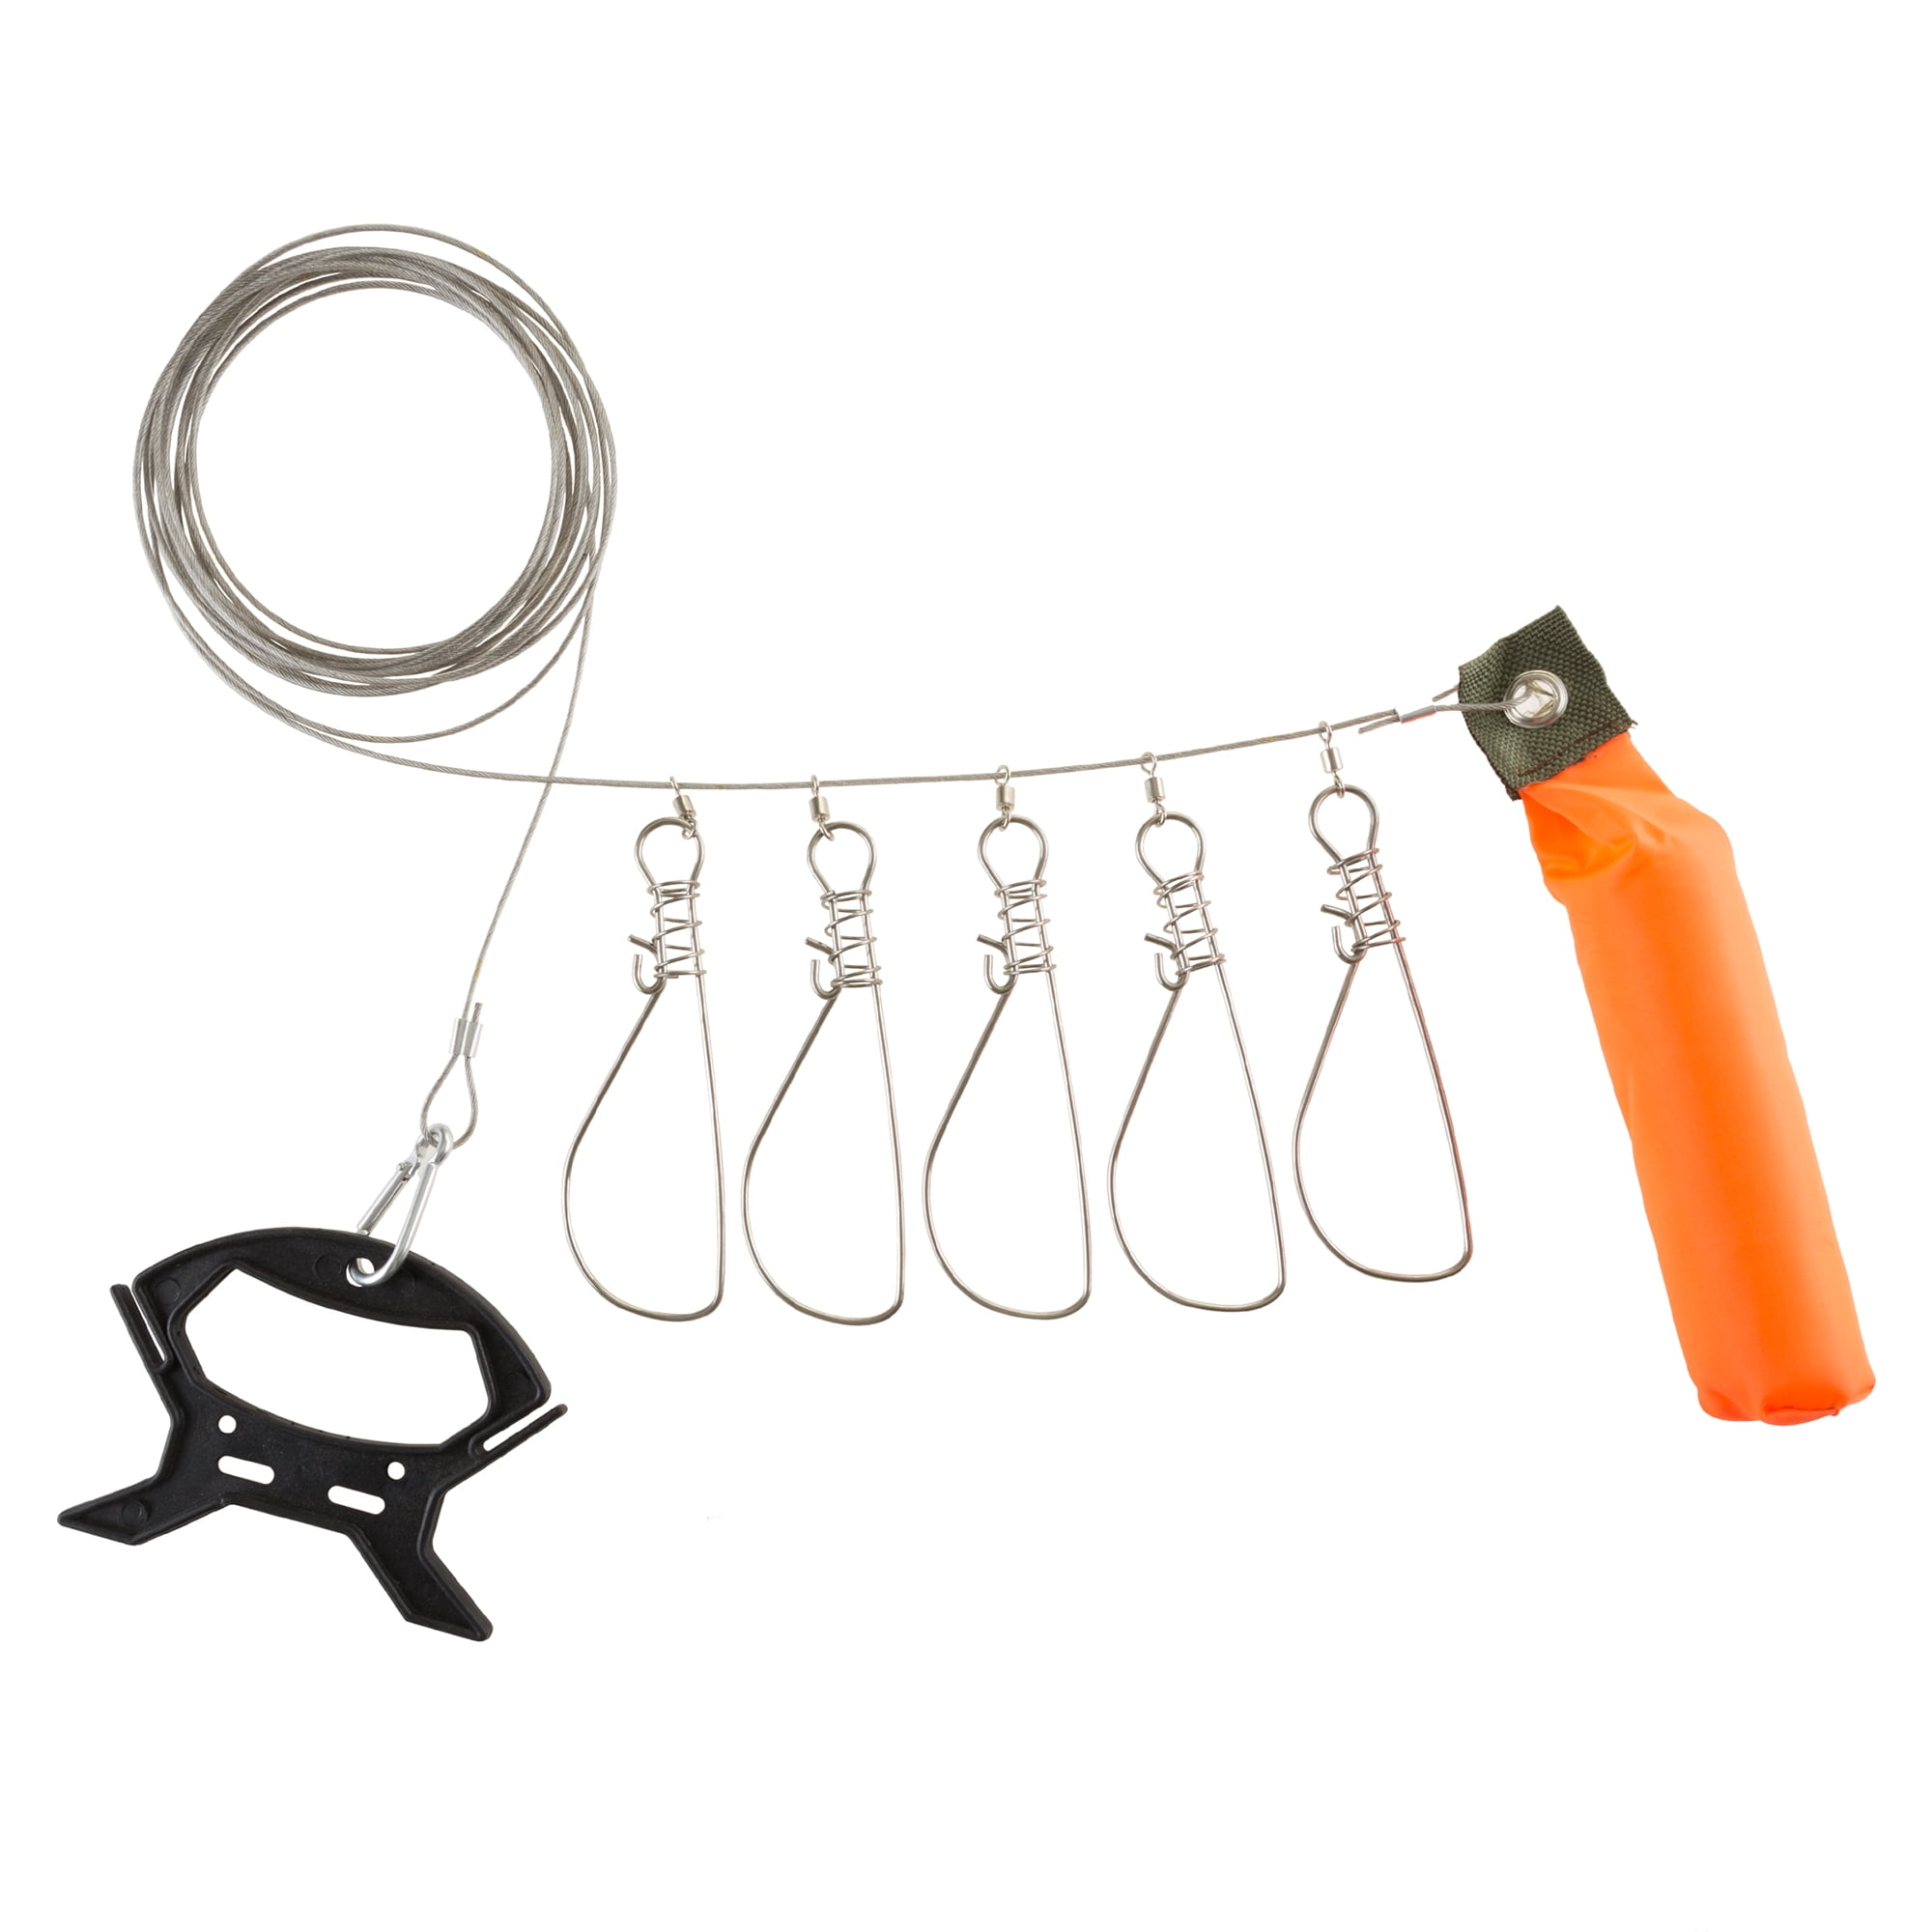 Fish Stringer- Heavy Duty Rope Stringer for Fishing with 5